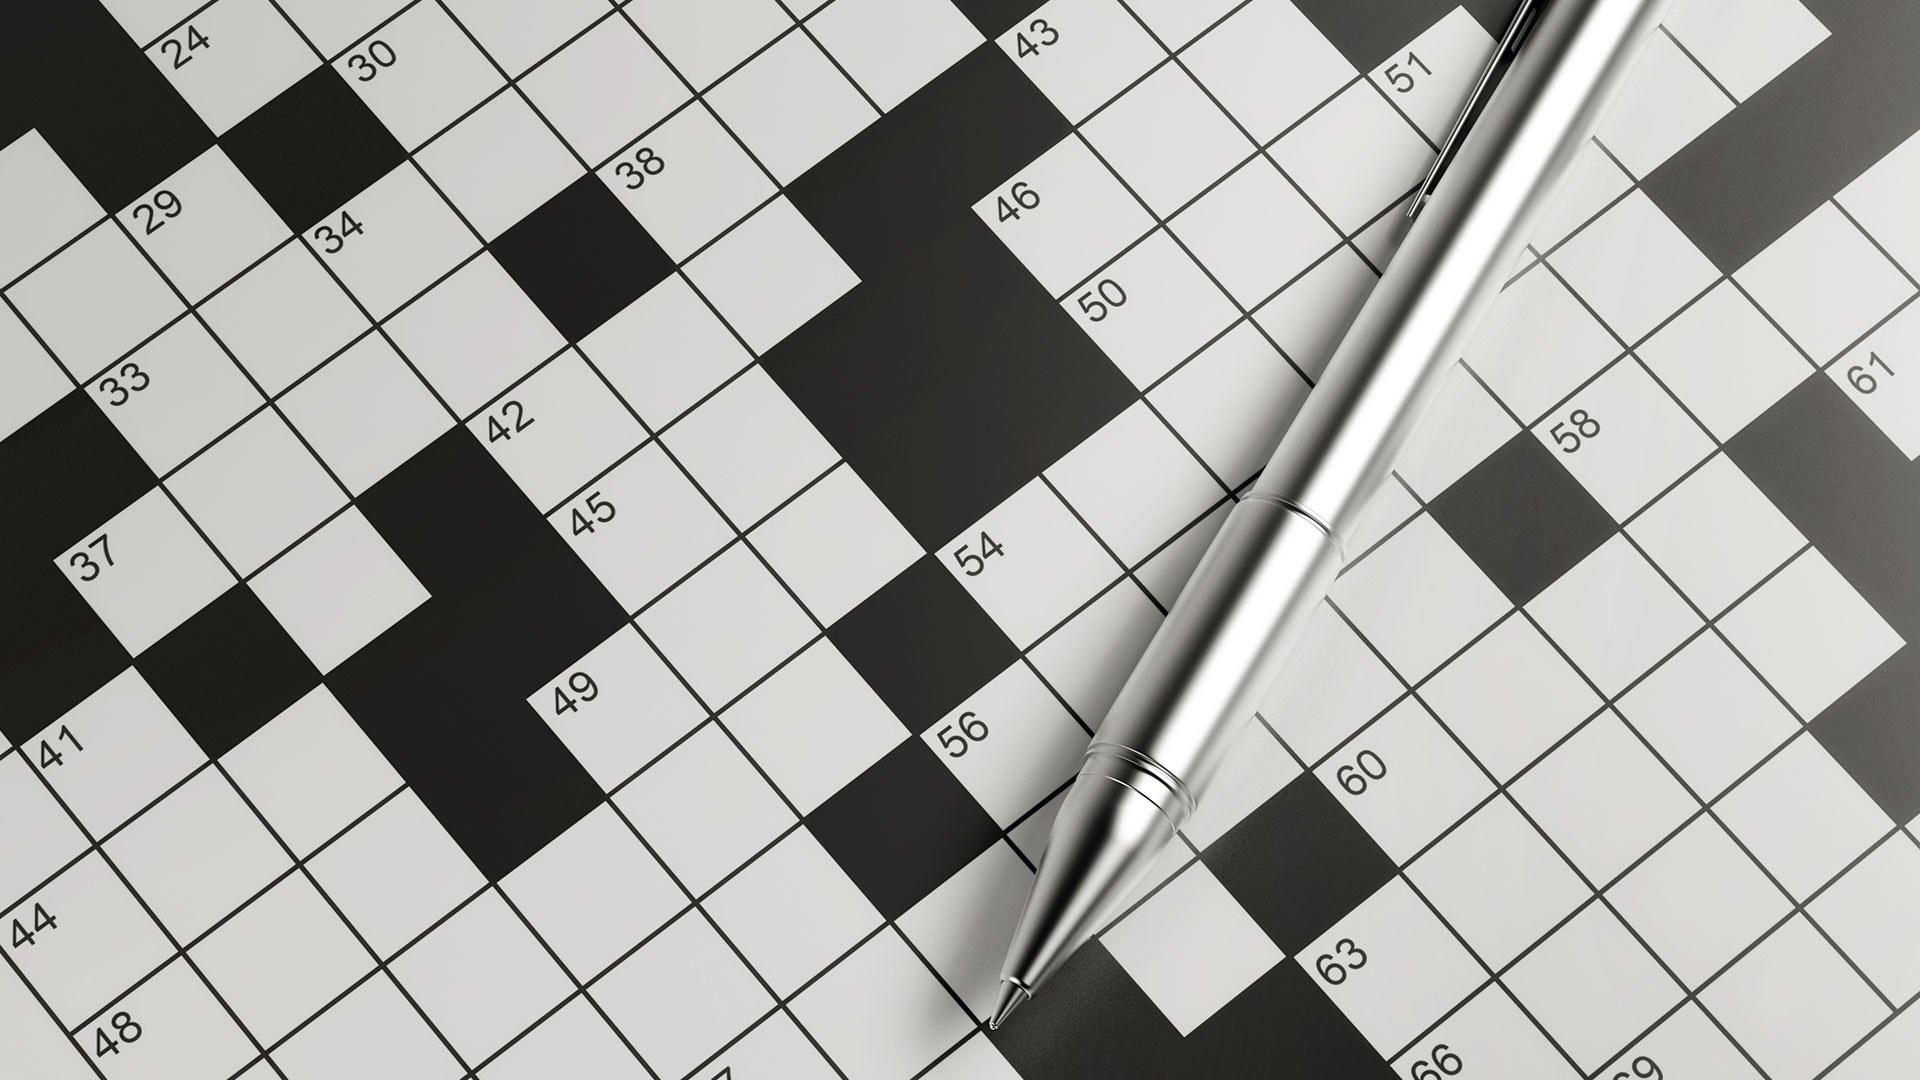 What Do Shaded Squares Mean in a Crossword? focushubs